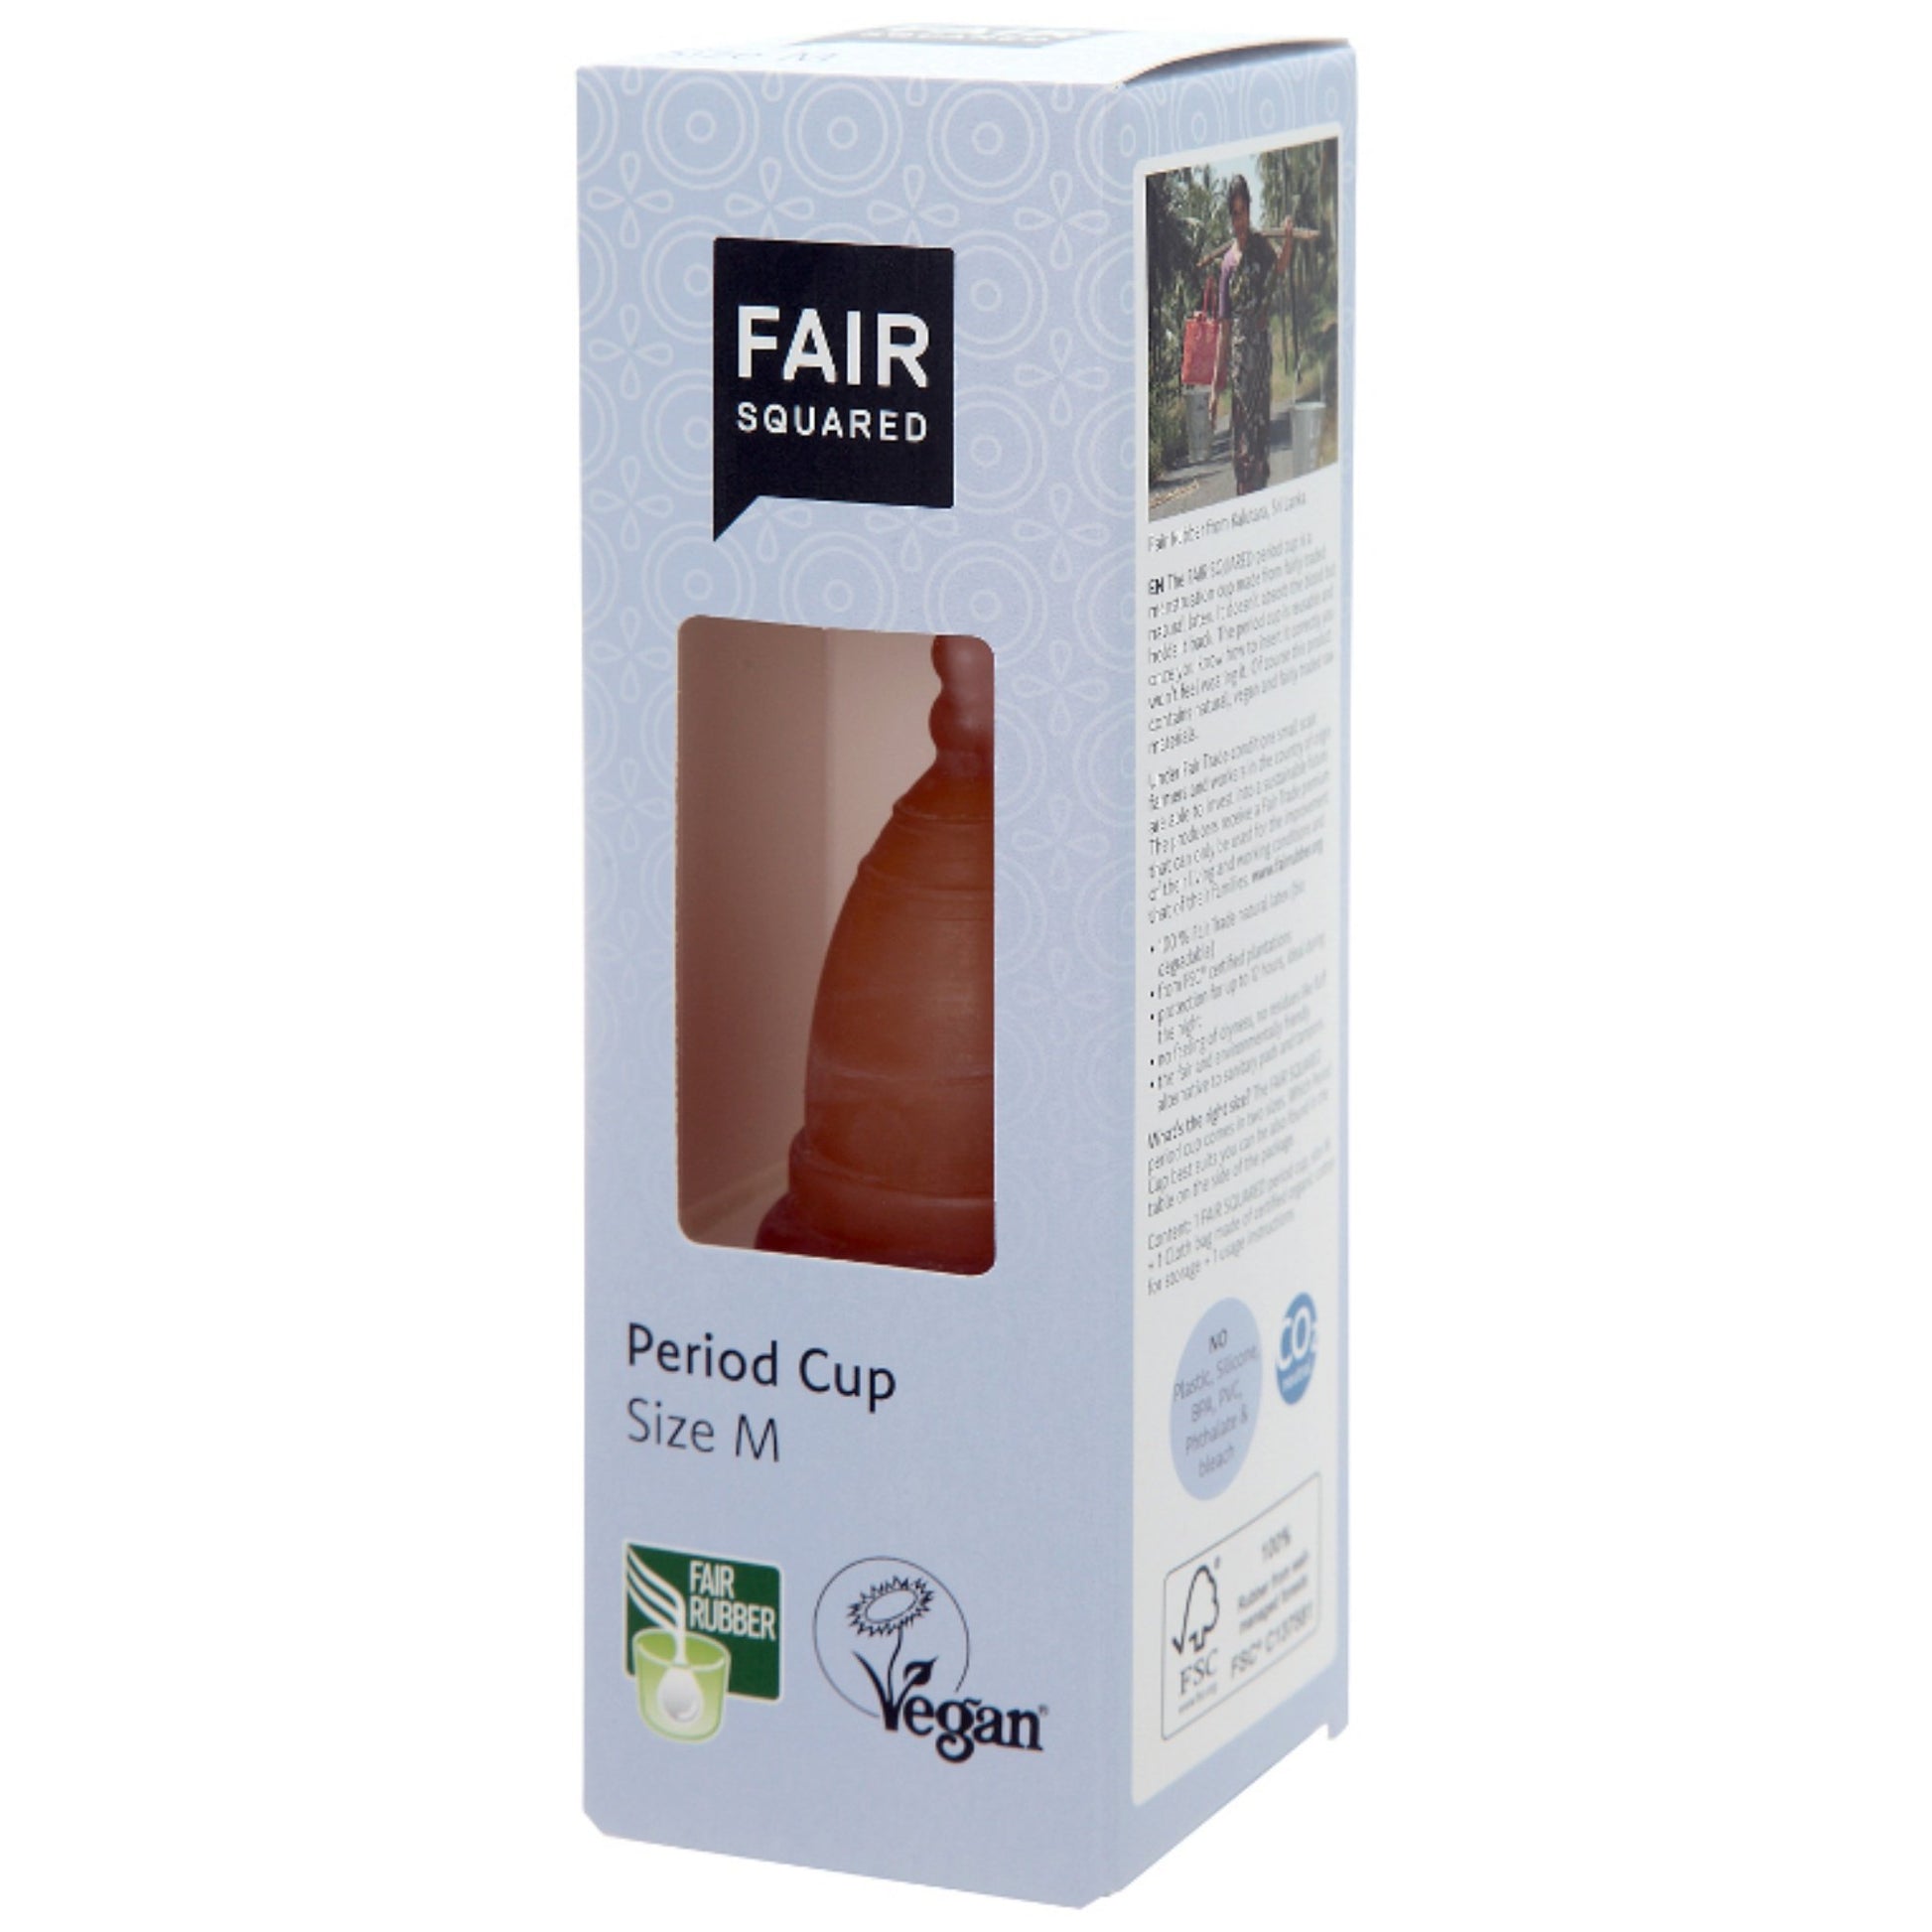 FAIR SQUARED Period-Cup M | Fairtrade Vegan | Box Front | BeoVERDE.ie